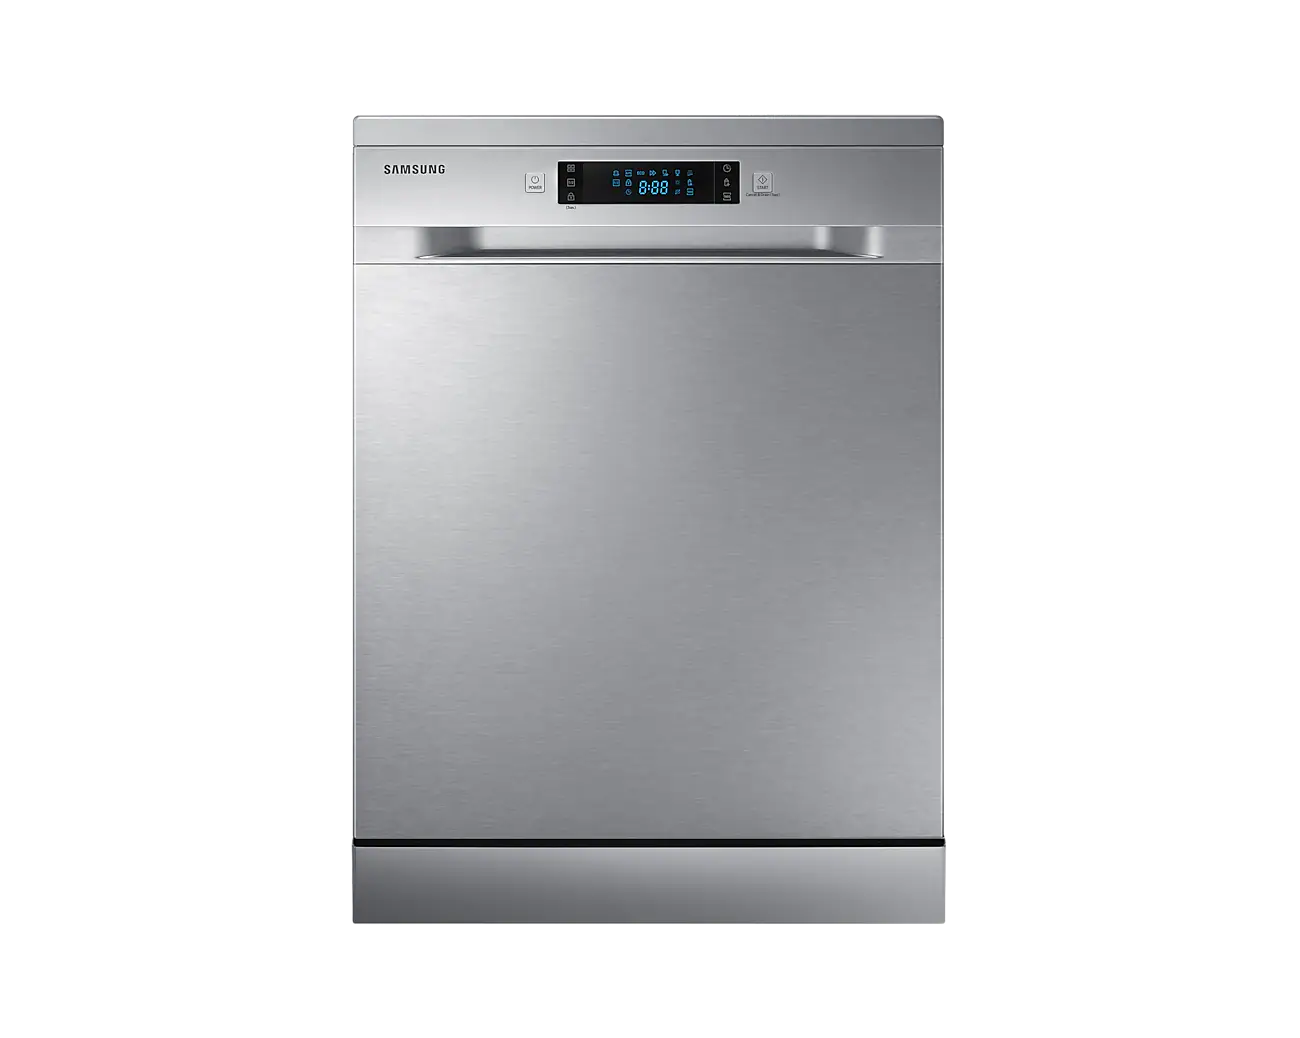 Samsung 14 Place Dishwasher with Wide Led Display - Silver